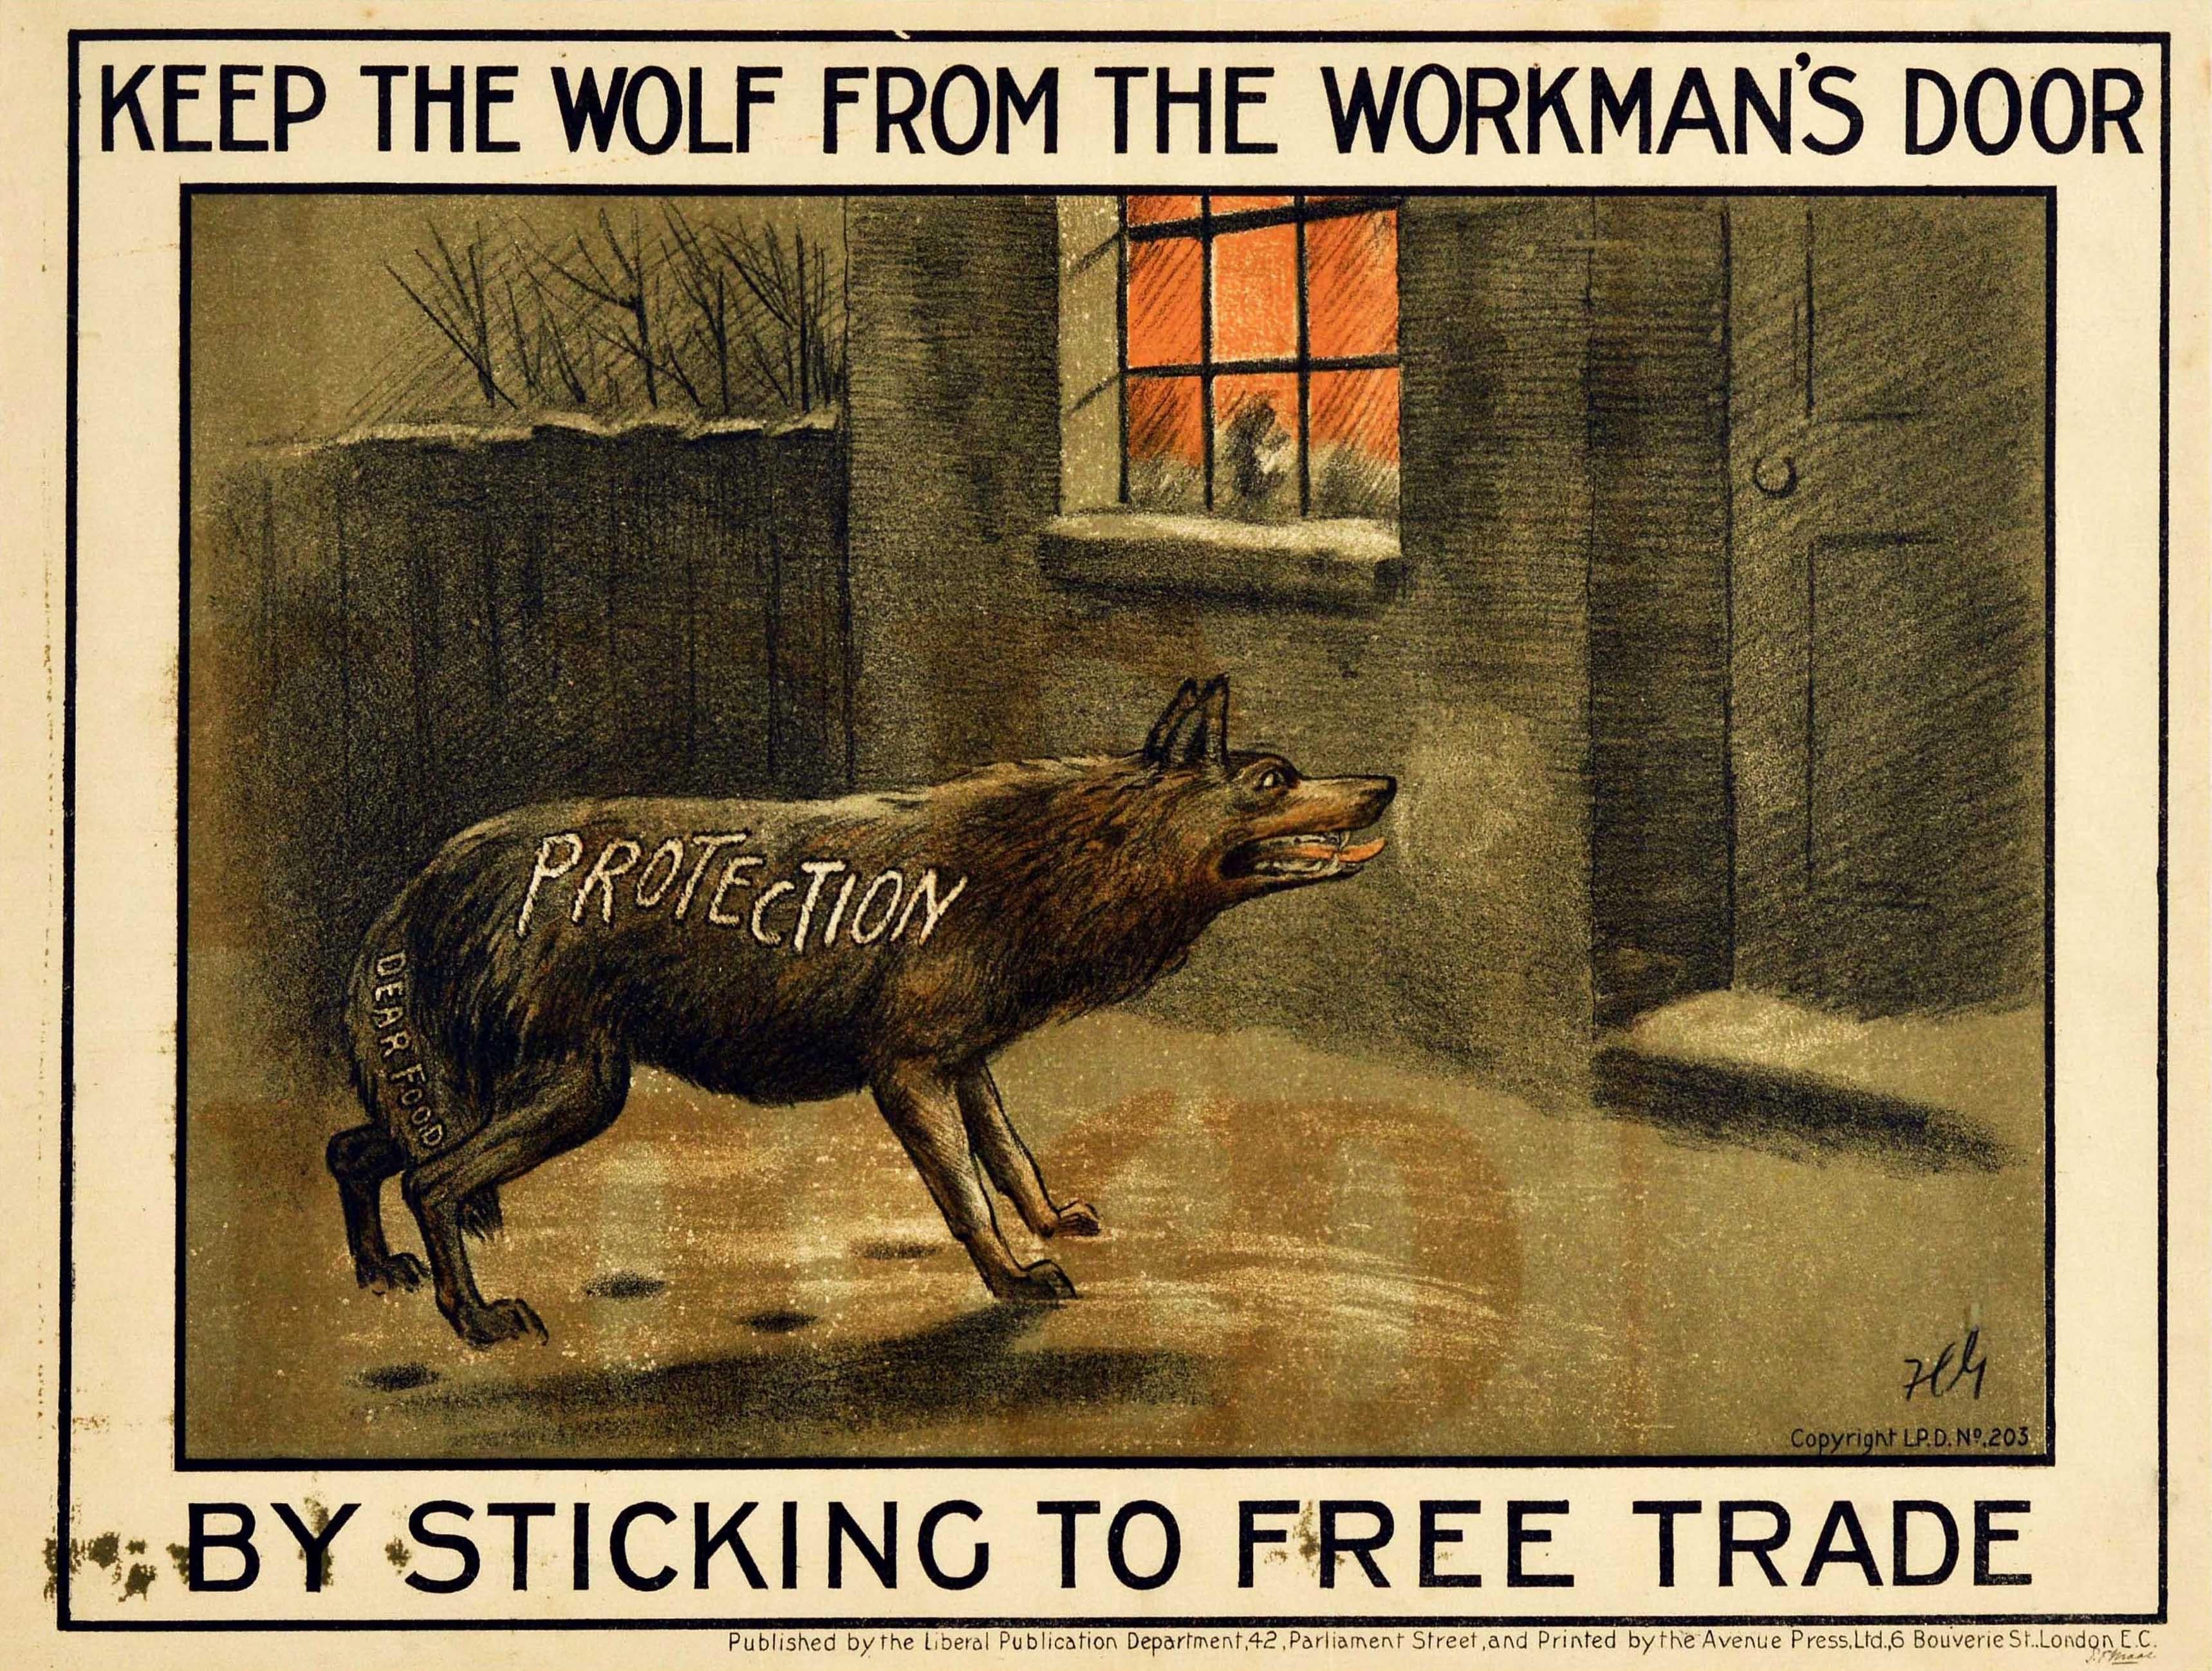 Unknown Print - Original Antique Poster Liberal Party Politics Free Trade Protection Wolf Design